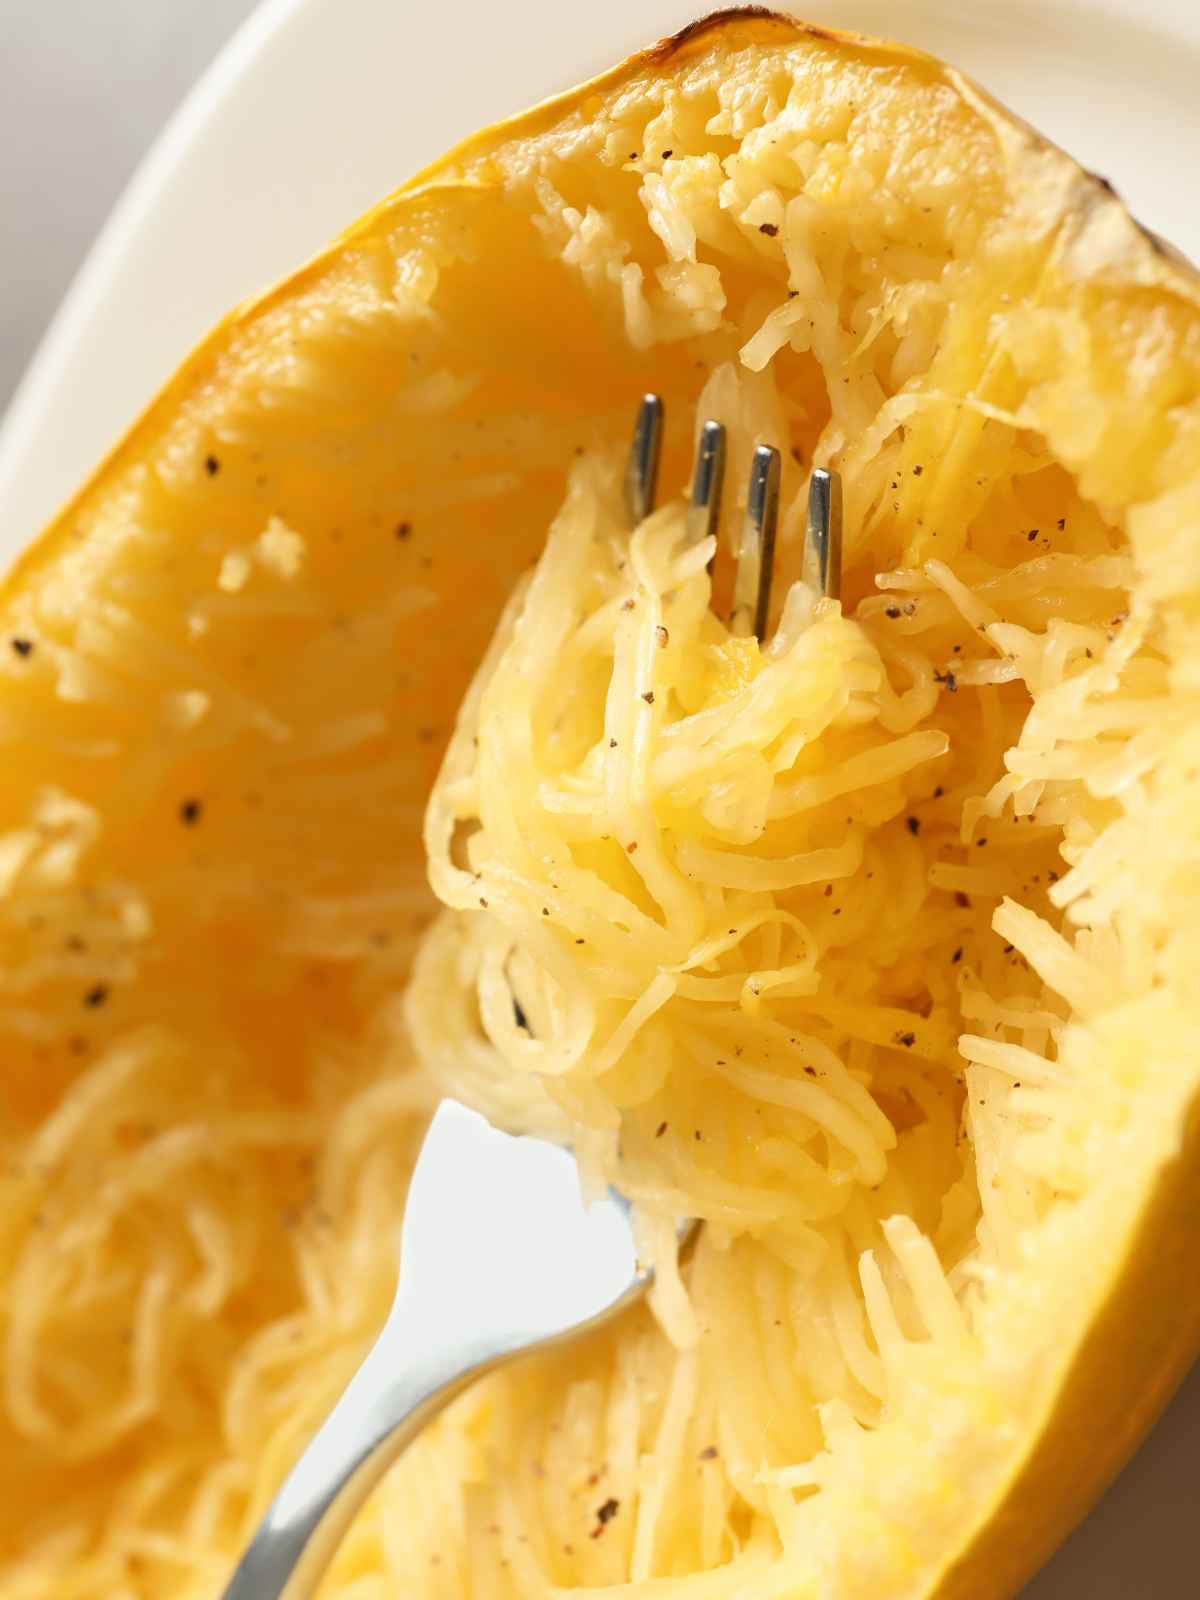 Baked spaghetti squash with a silver fork.